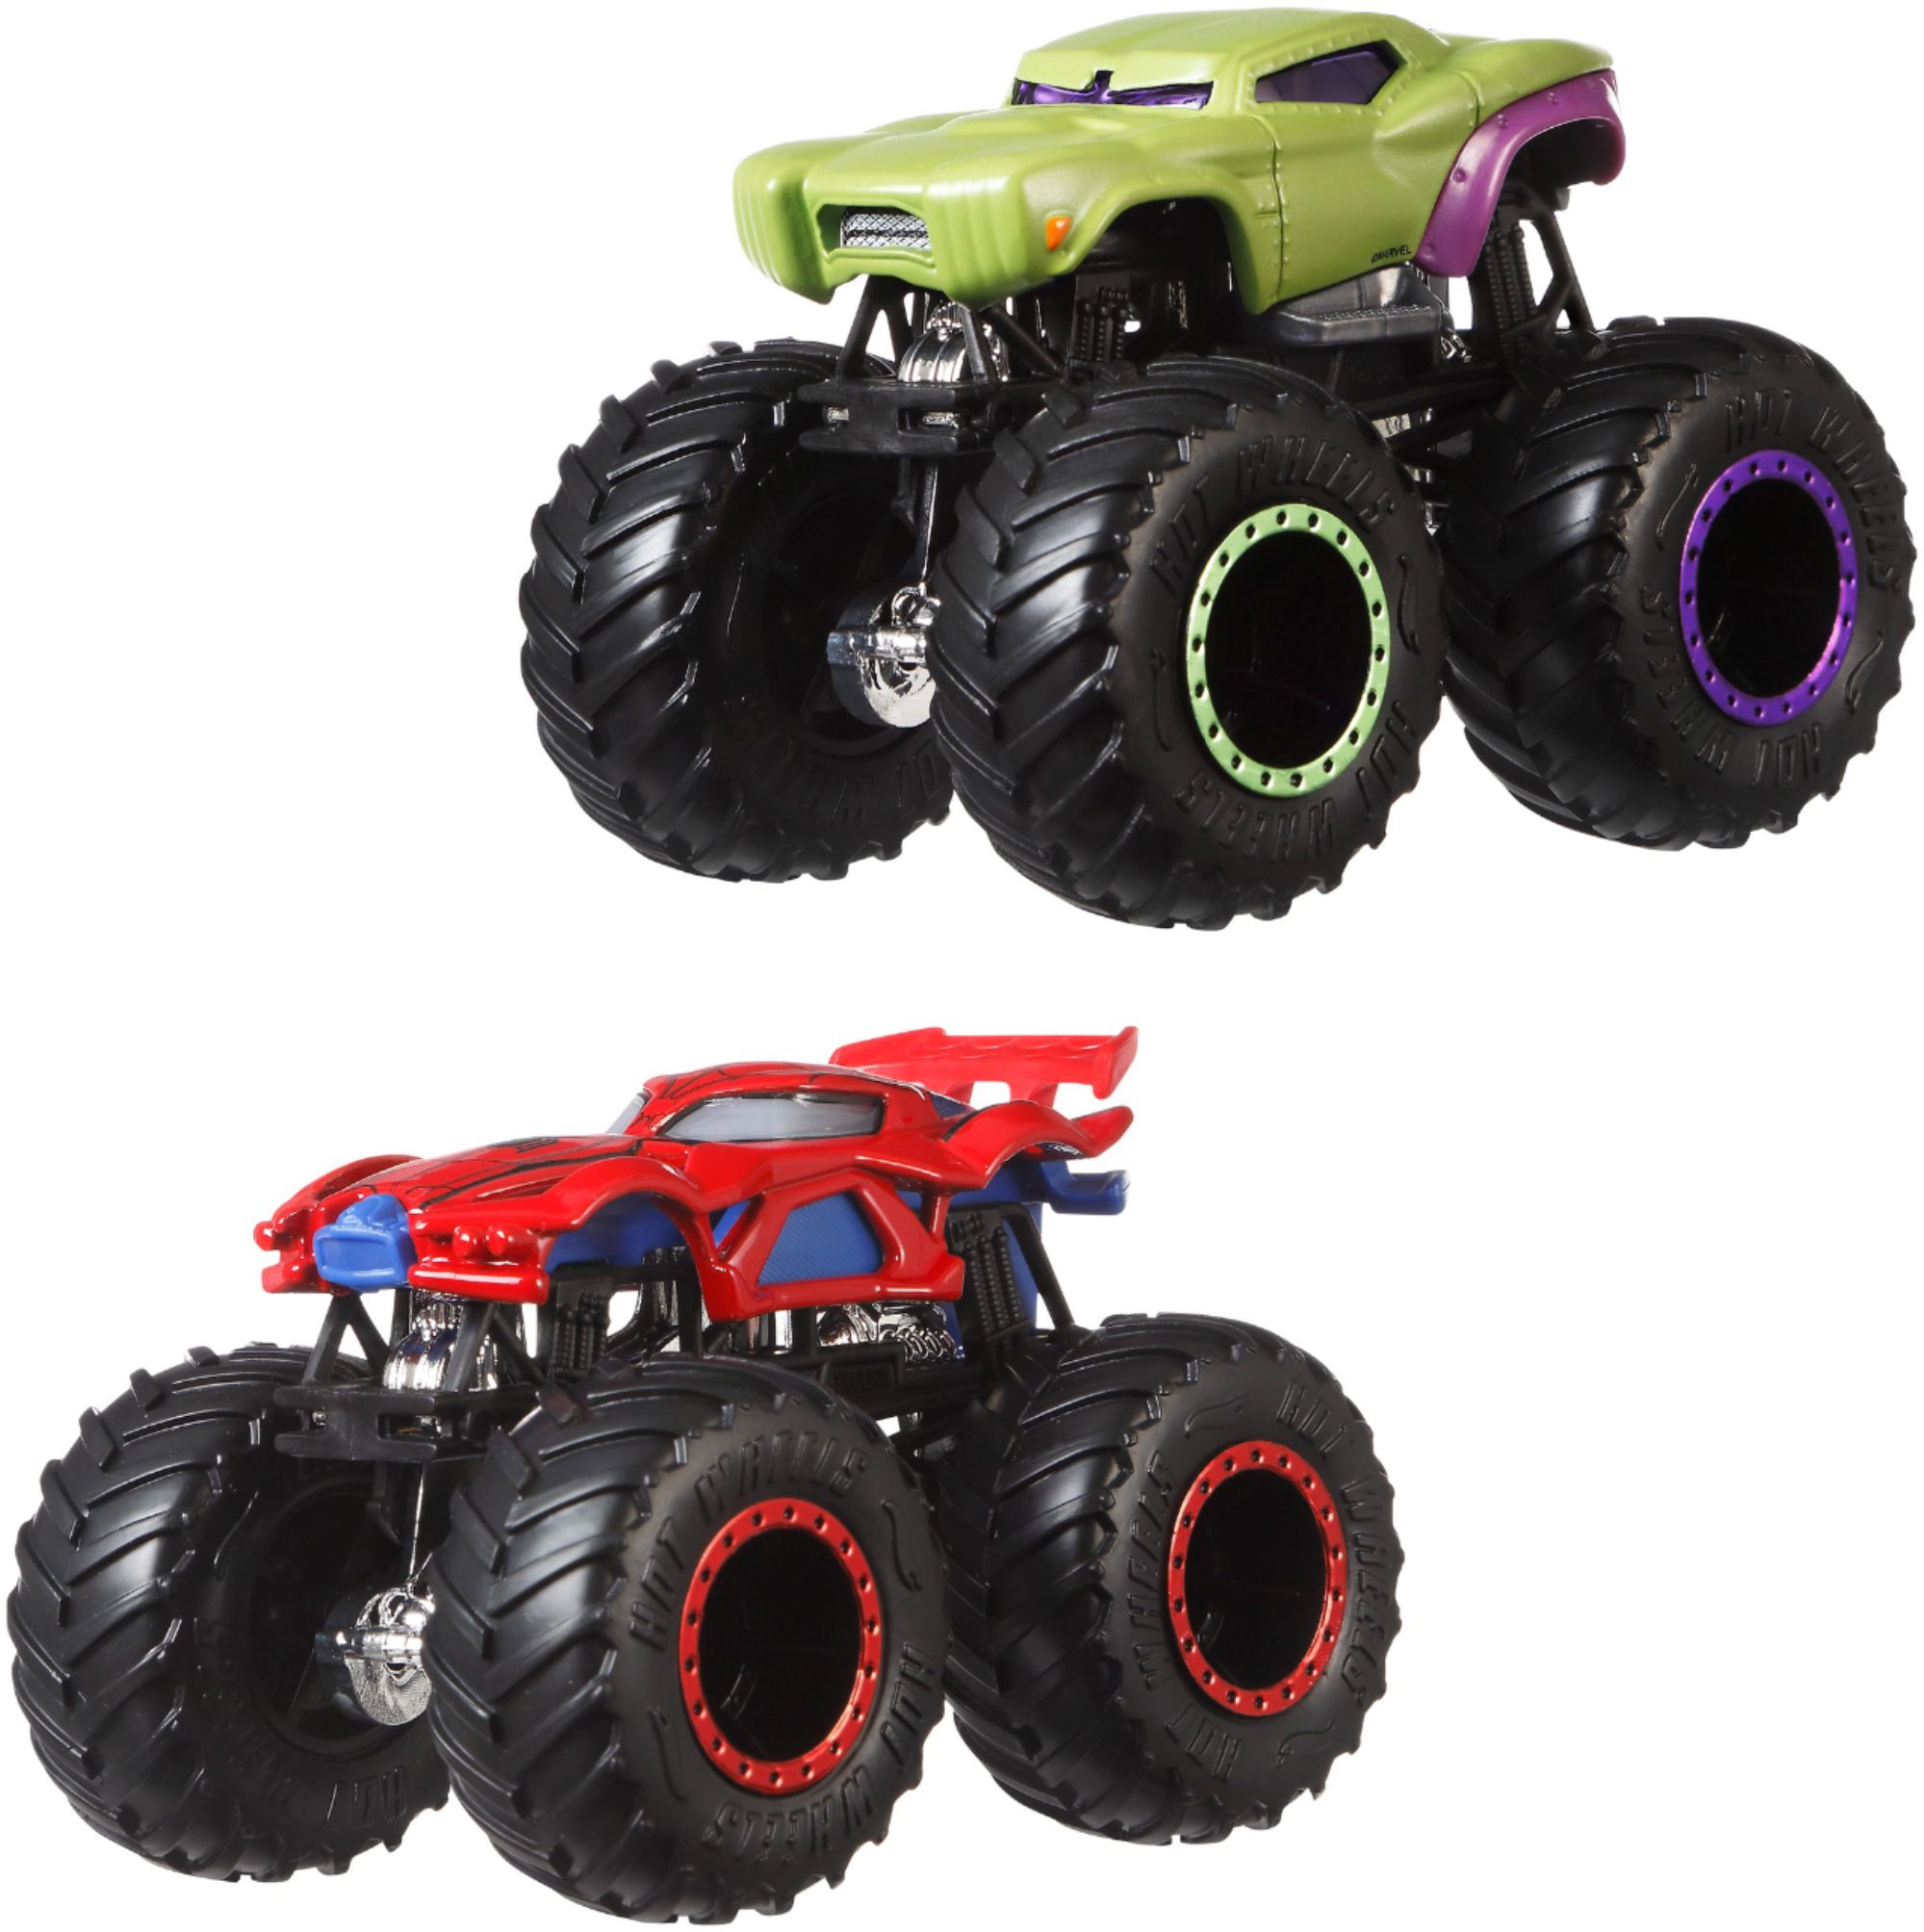 Hot Wheels Monster Trucks Live 8-Pack of Toy Trucks in 1:64 Scale (Styles  May Vary)